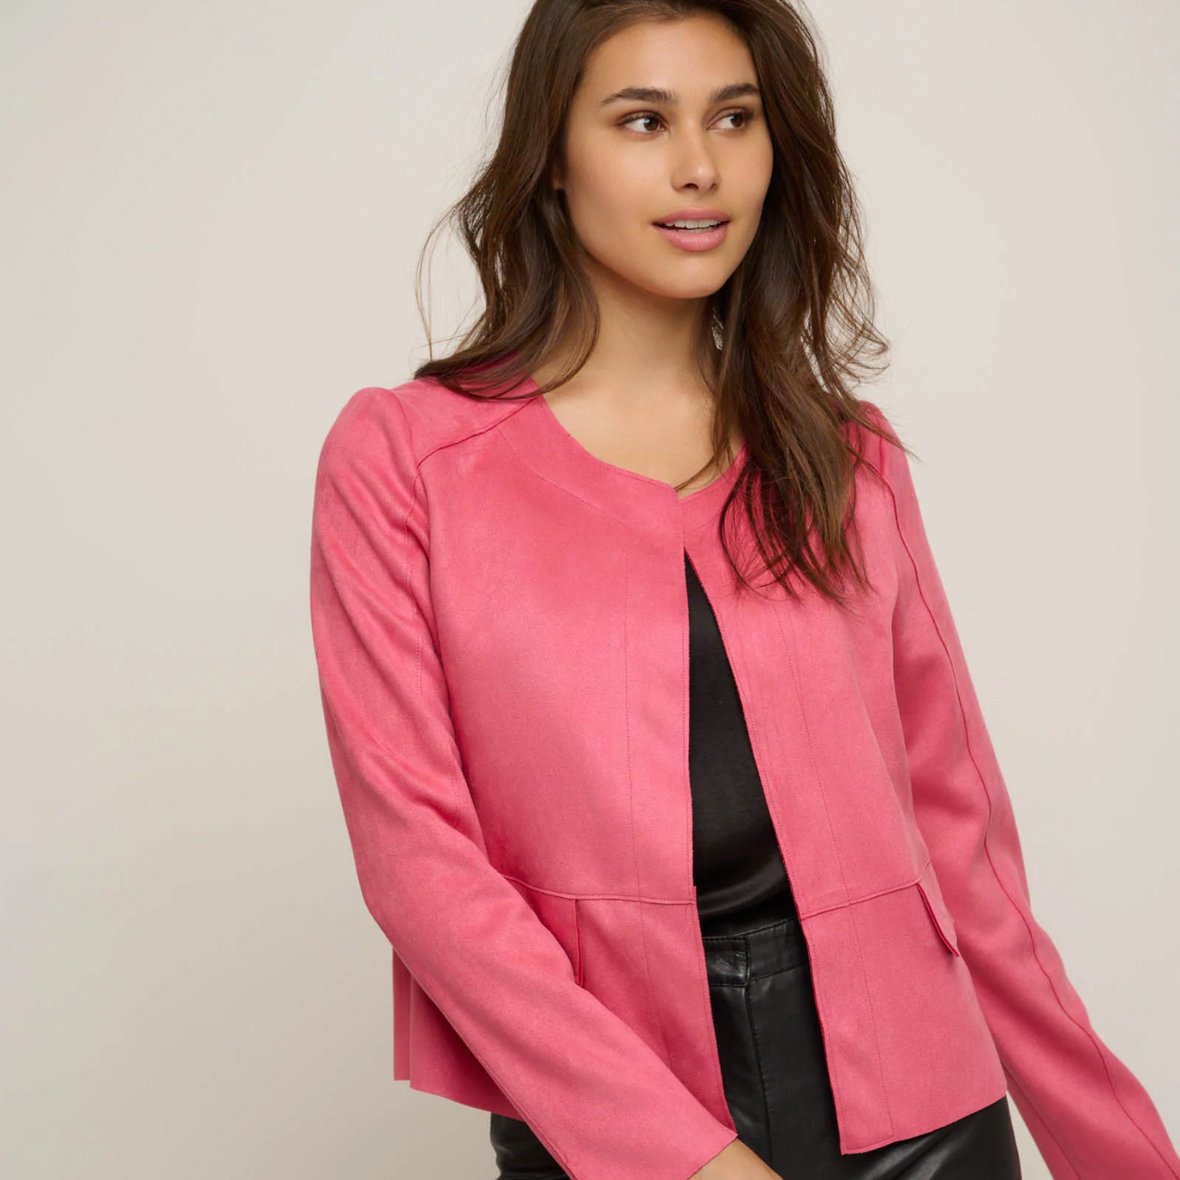 female model wearing pink slim fit jacket looking away from camera smiling